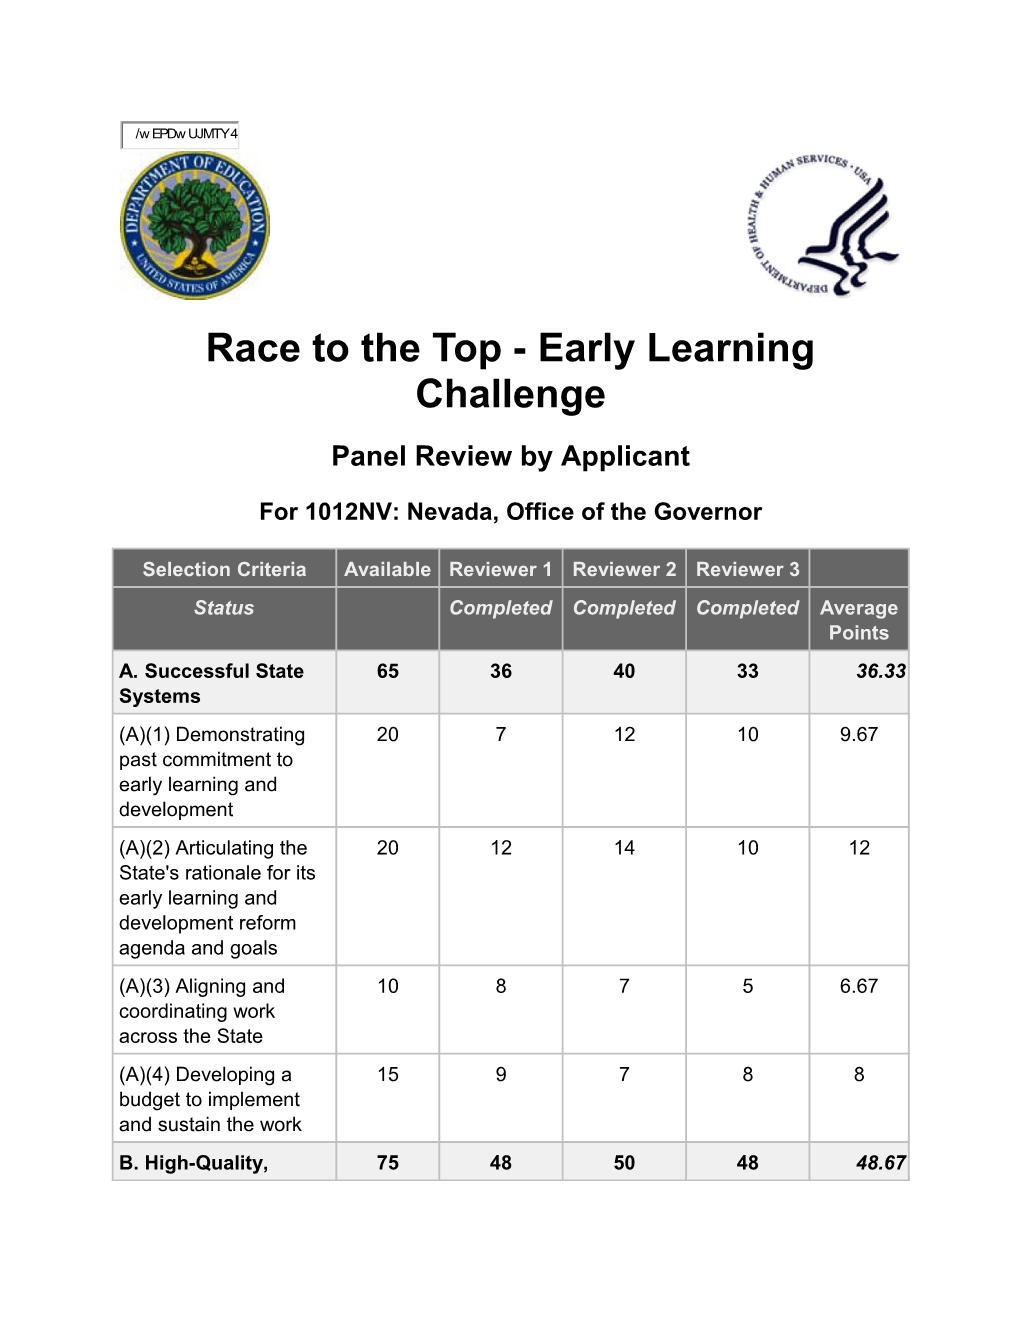 Nevada: Score Sheet for Phase 3, Race to the Top-Early Learning Challenge, Application